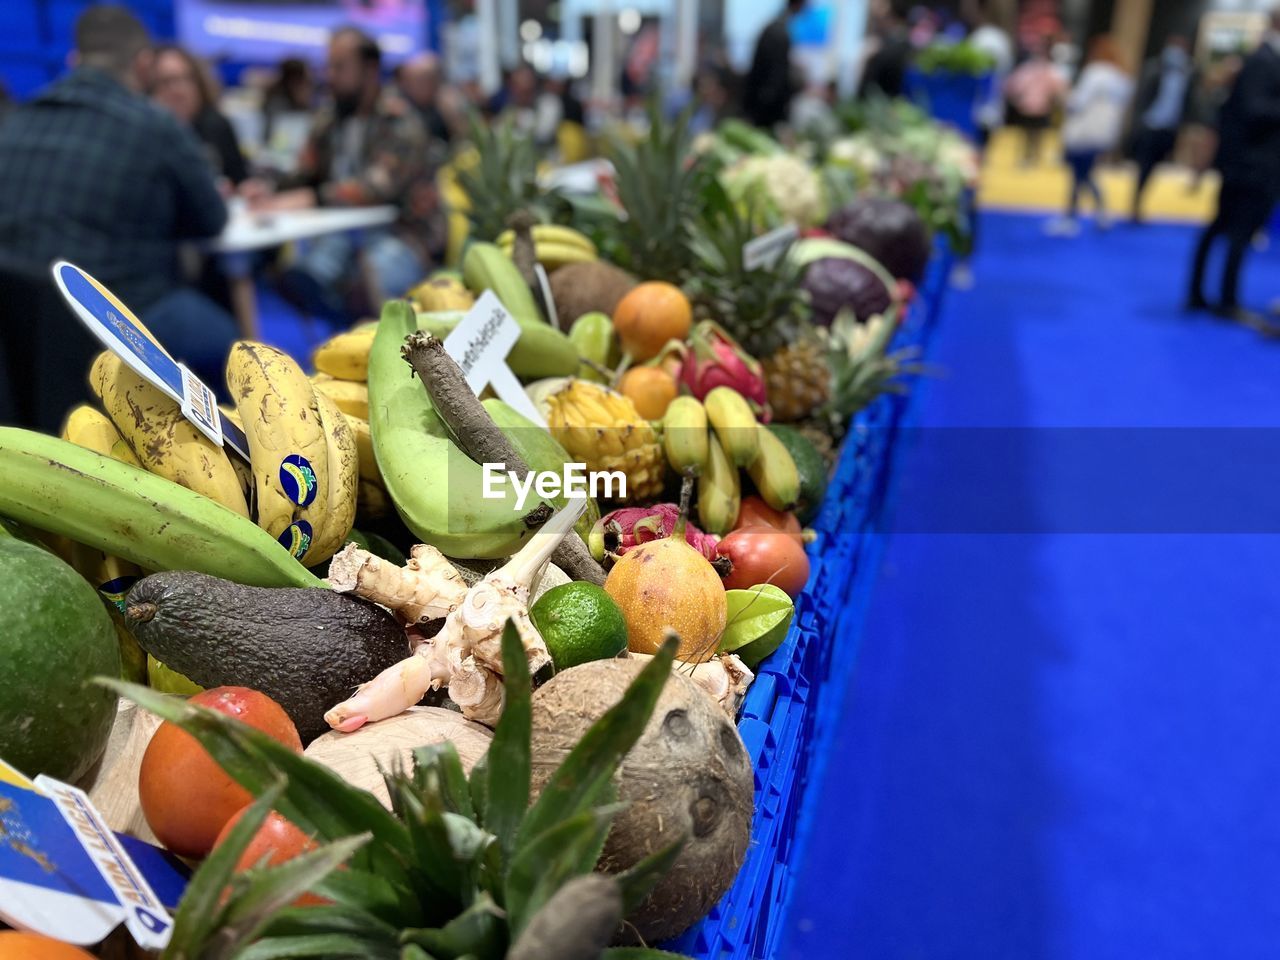 food and drink, food, healthy eating, market, vegetable, freshness, retail, wellbeing, market stall, fruit, business, variation, abundance, business finance and industry, city, flower, public space, large group of objects, for sale, day, container, banana, outdoors, crate